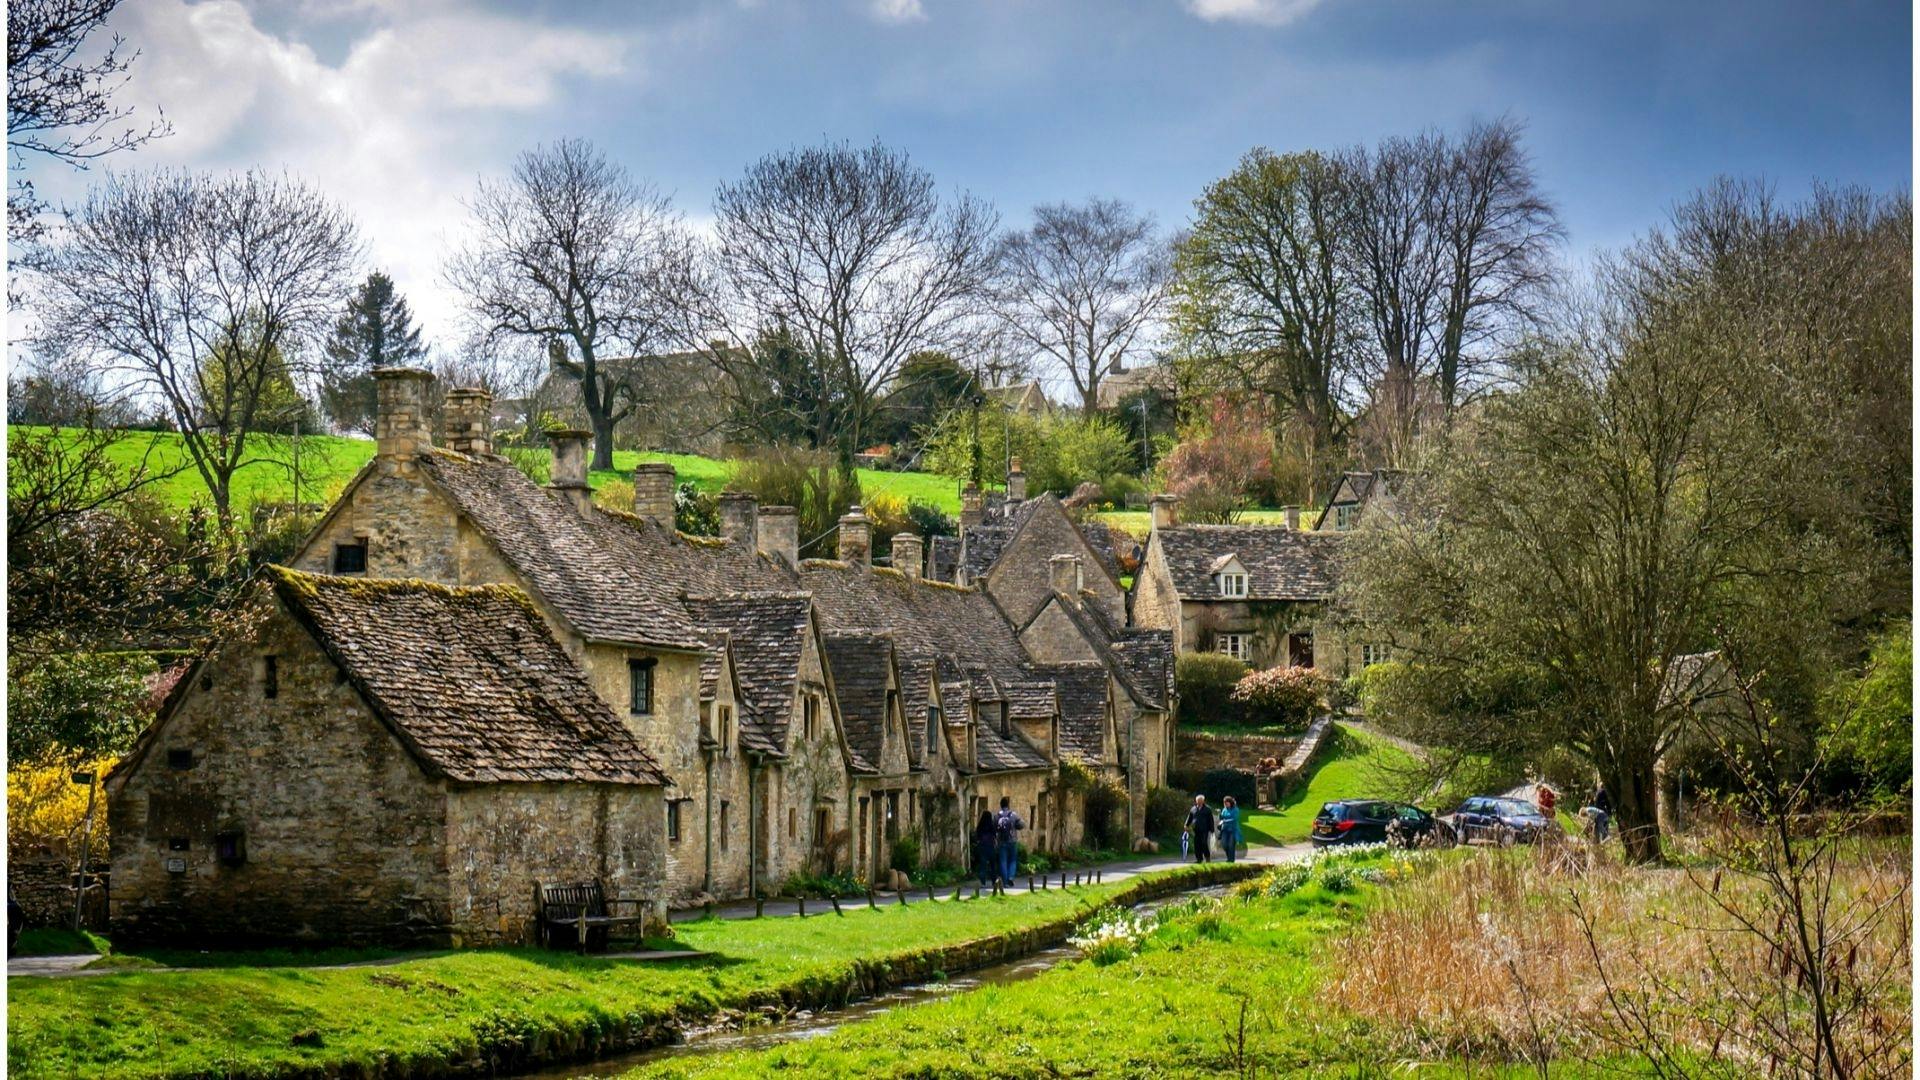 Small Group Tour to the Villages of the Cotswolds